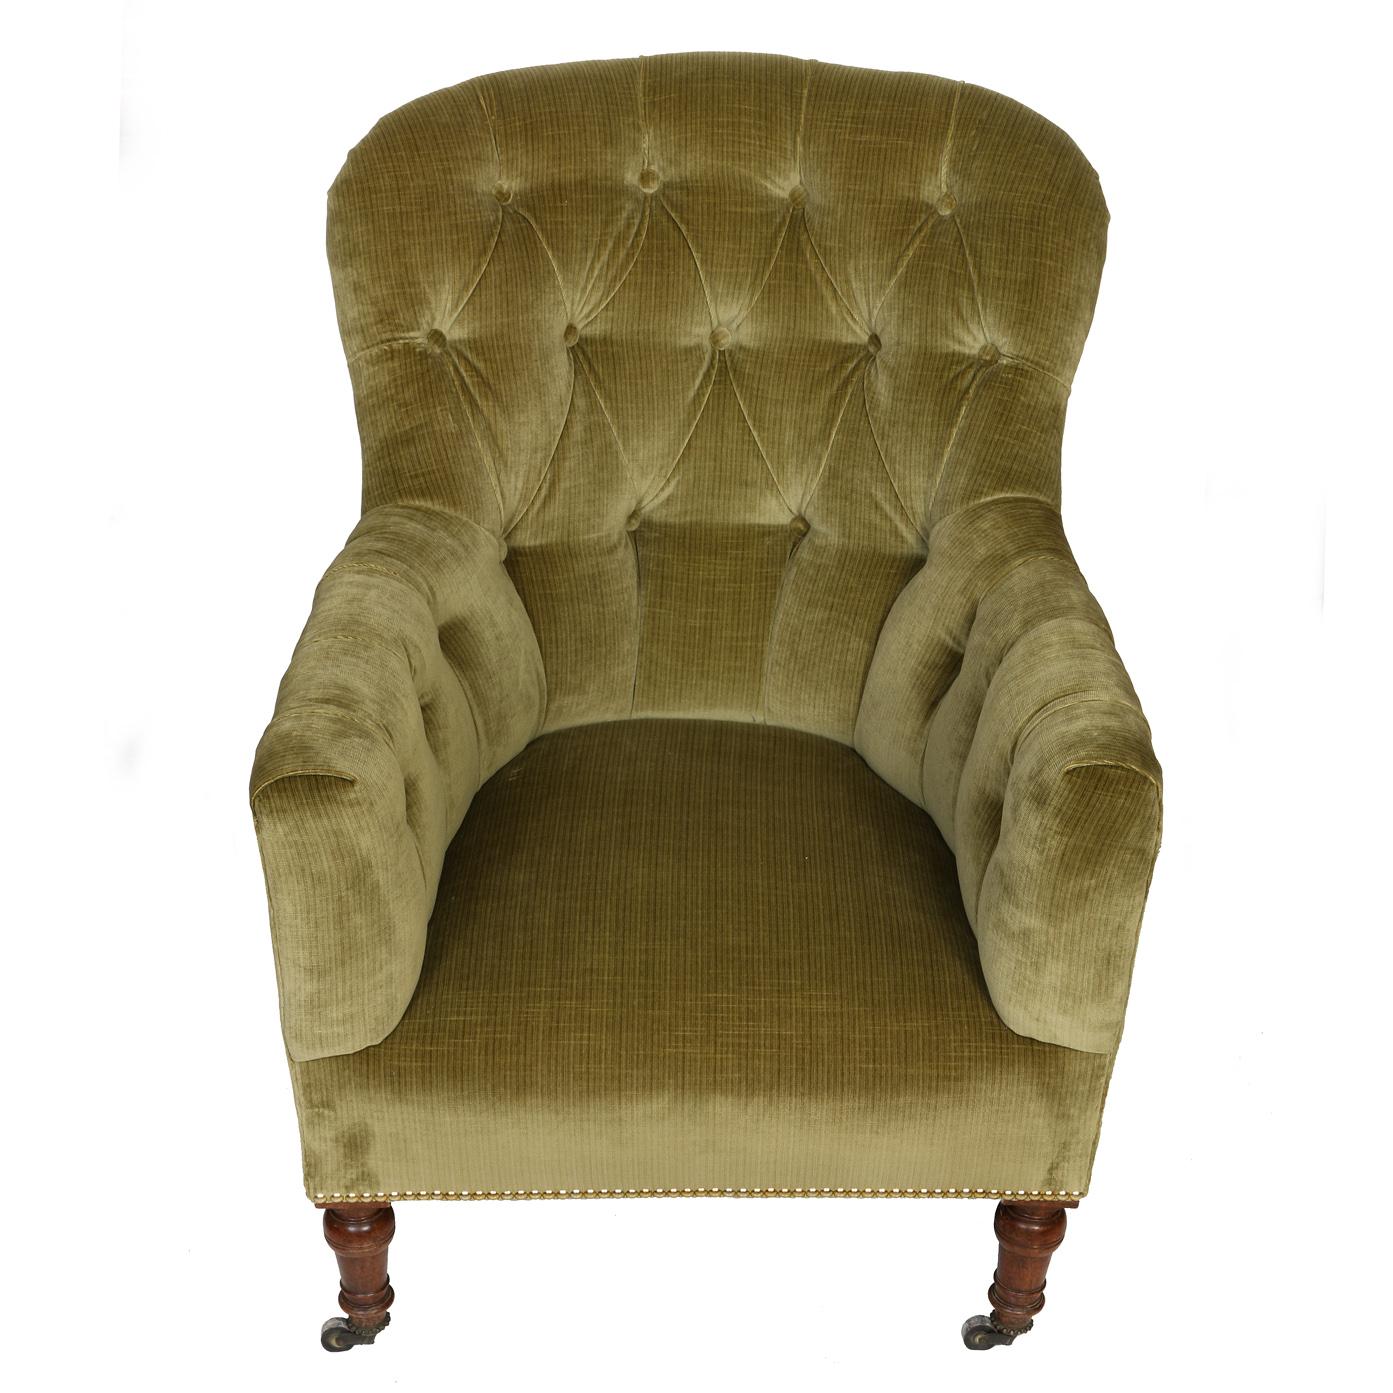 A pair of rounded back button tufted club chairs newly reupholstered in green strie velvet fabric. The lush green strie velvet upholstery envelops the chair, inviting you to indulge in a sensory experience of softness and opulence. The rounded back